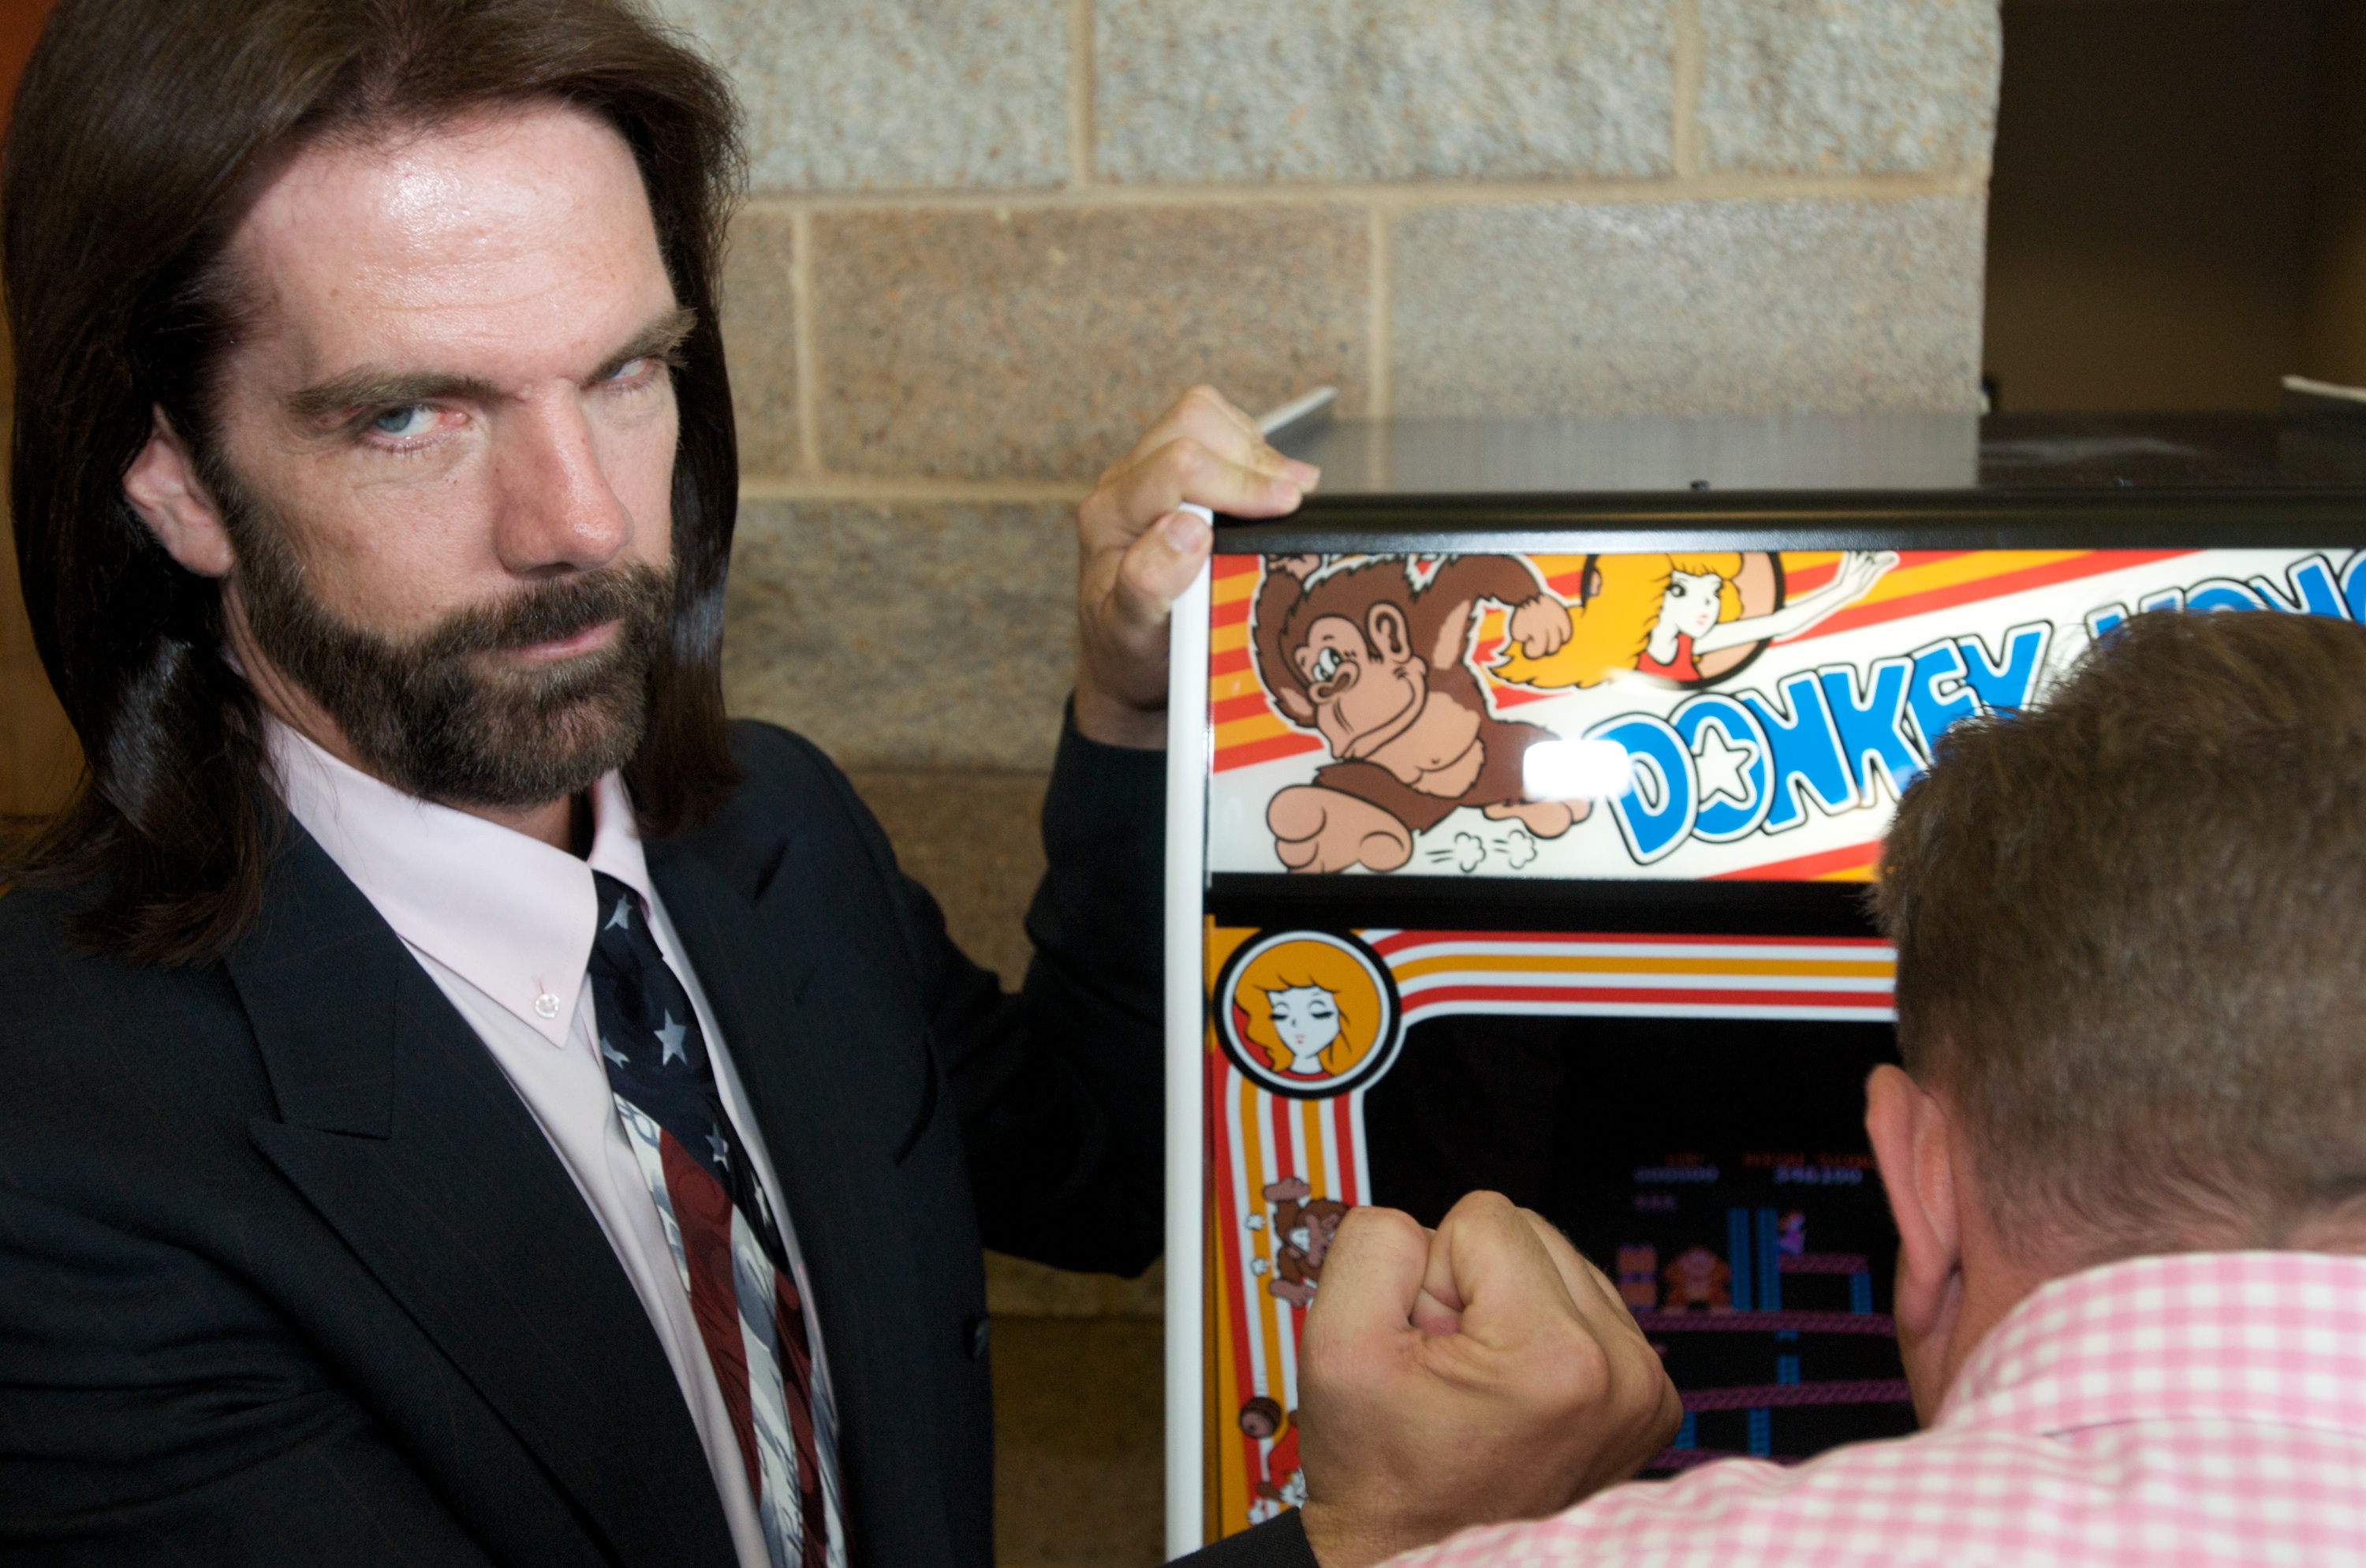 Billy Mitchell, the Video Game Player of the Century, poses while Steve Sanders, 'The Orignal King of Kong,' plays Donkey Kong at the launch party for the International Video Game Hall of Fame and Museum on August 13, 2009 in Ottumwa, Iowa. (David Greedy&mdash;Getty Images)